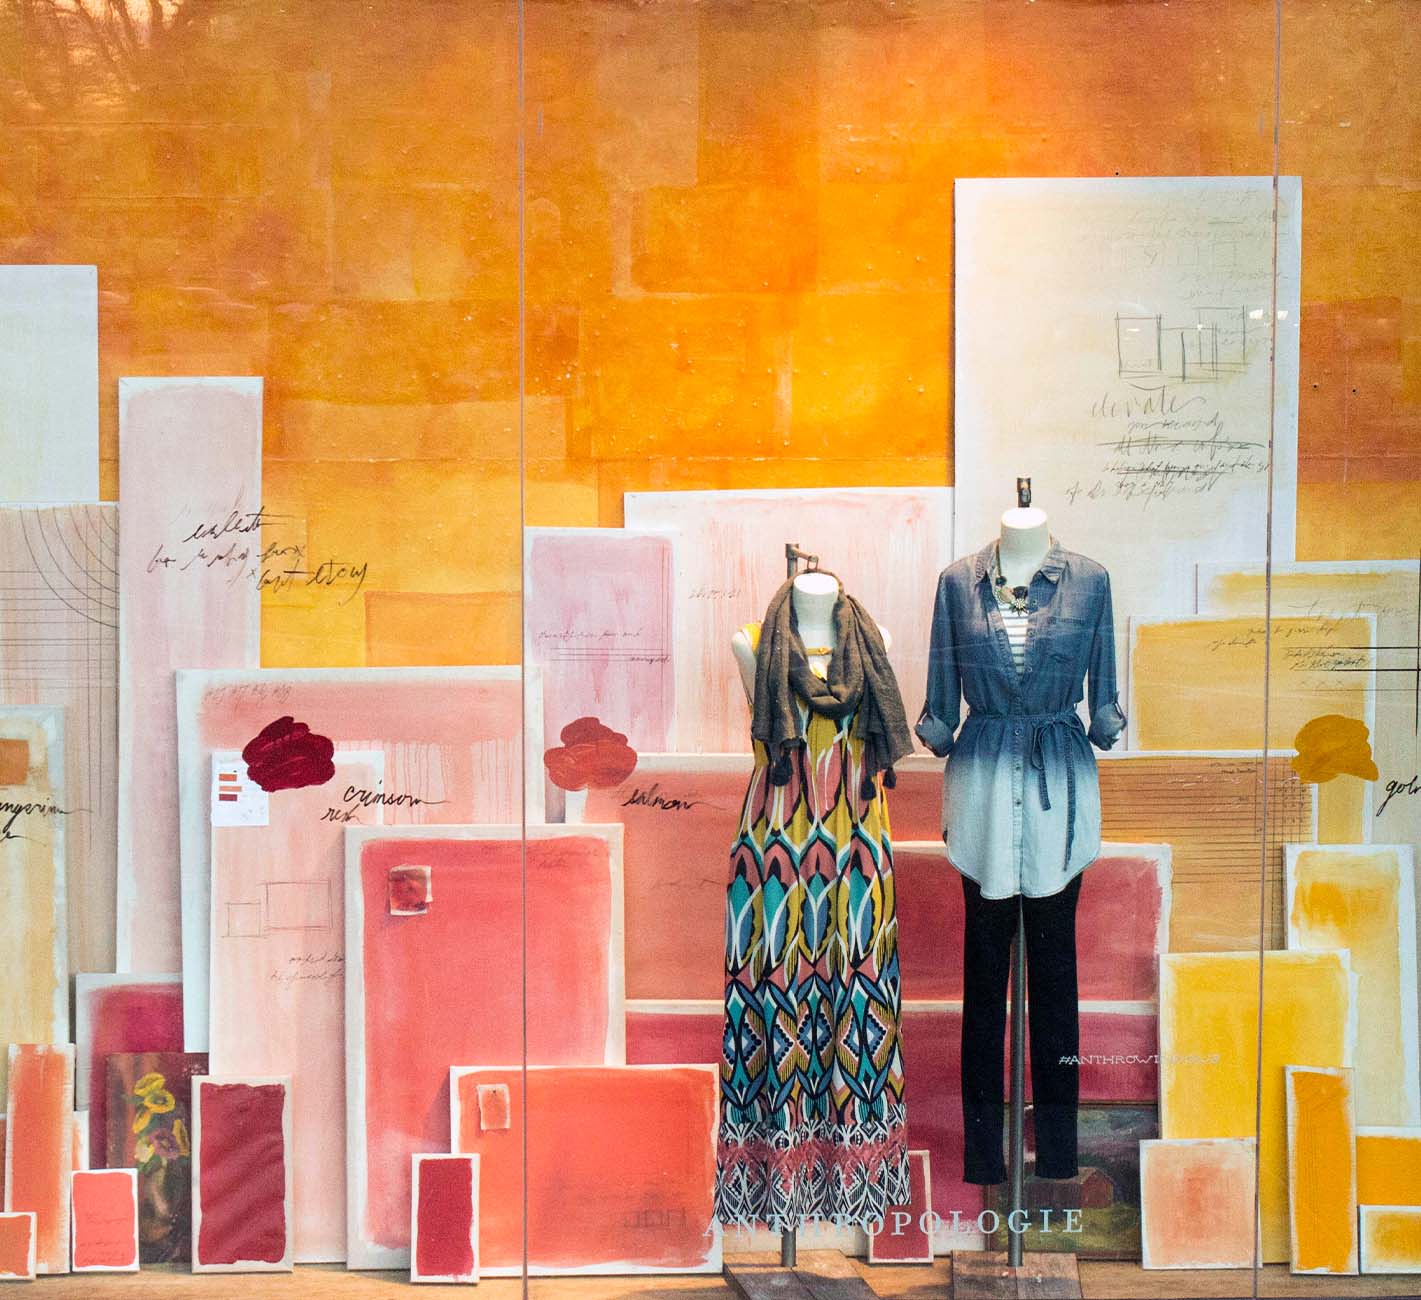 Anthropologie branding chief discusses arty store displays at DCCA